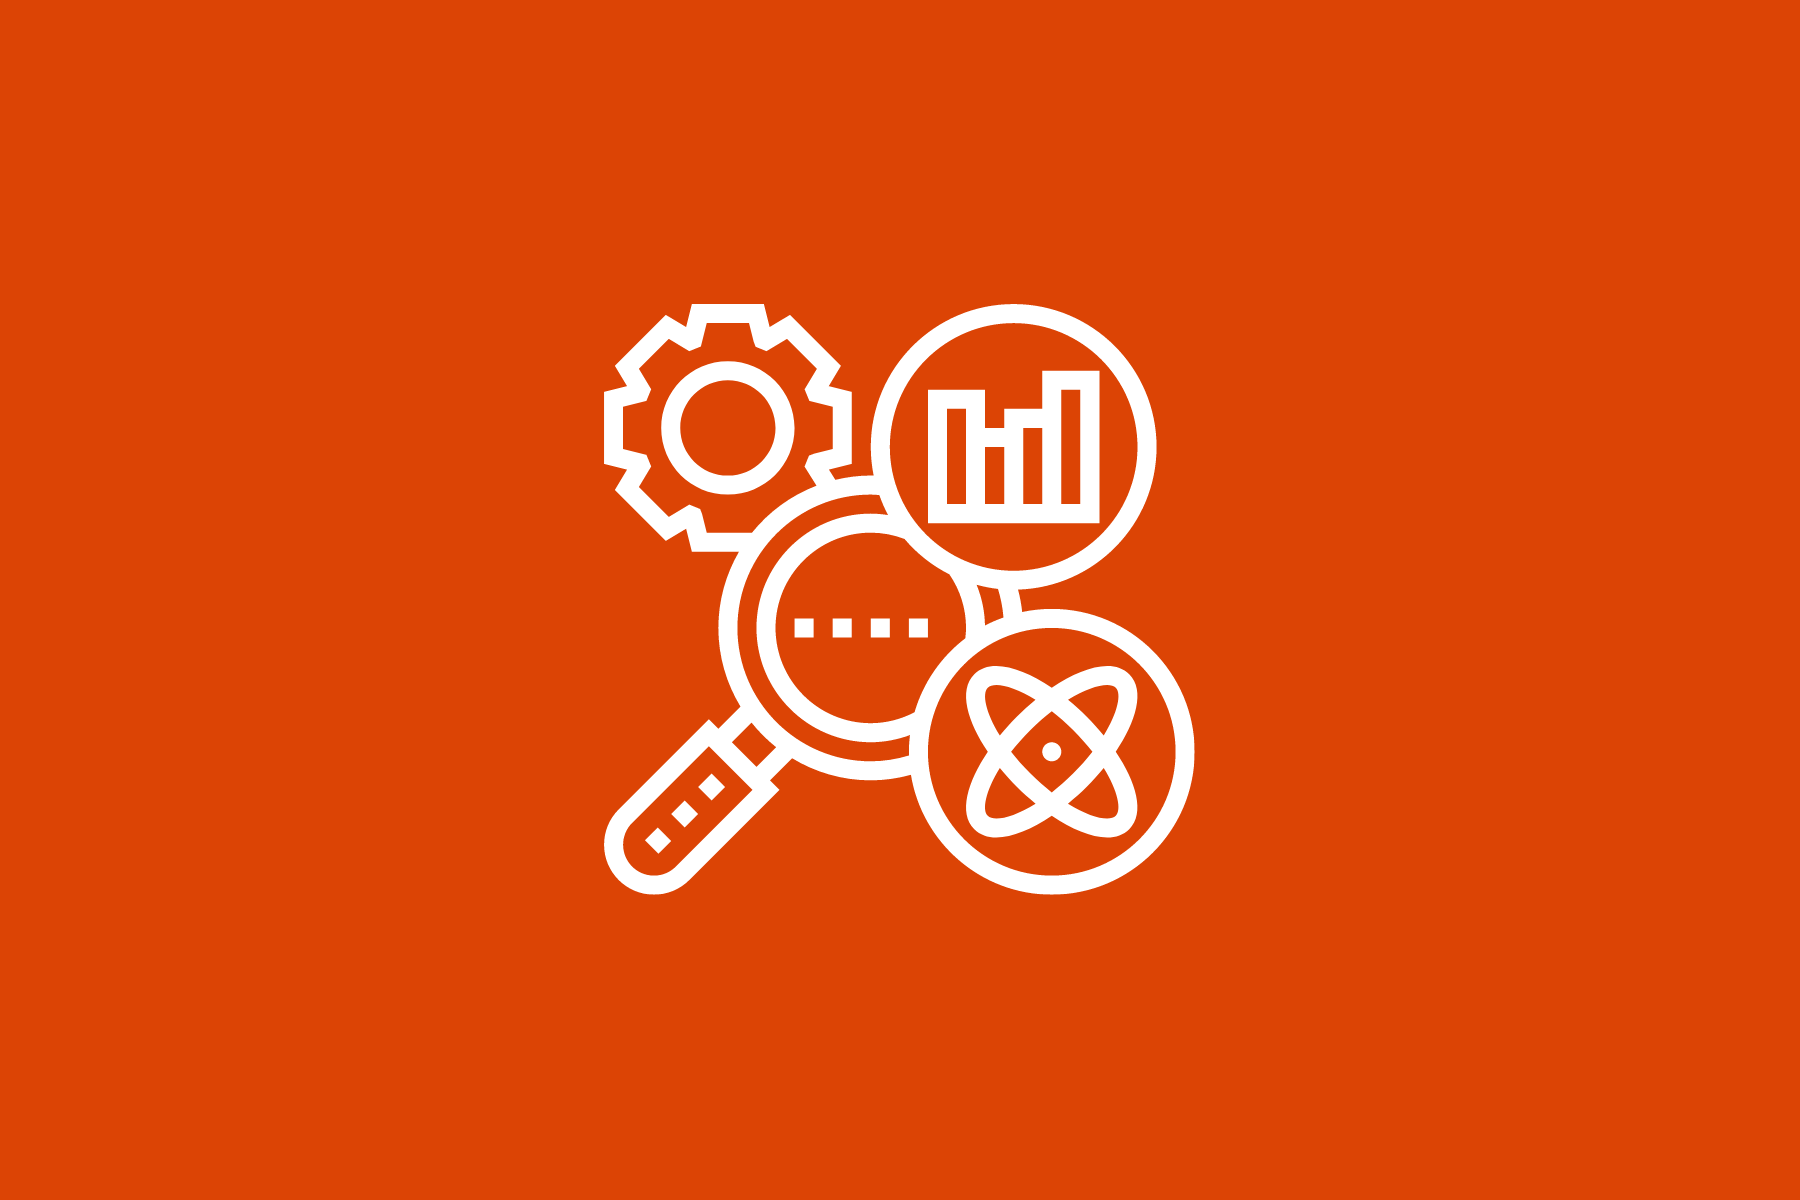 Research areas icon on orange background